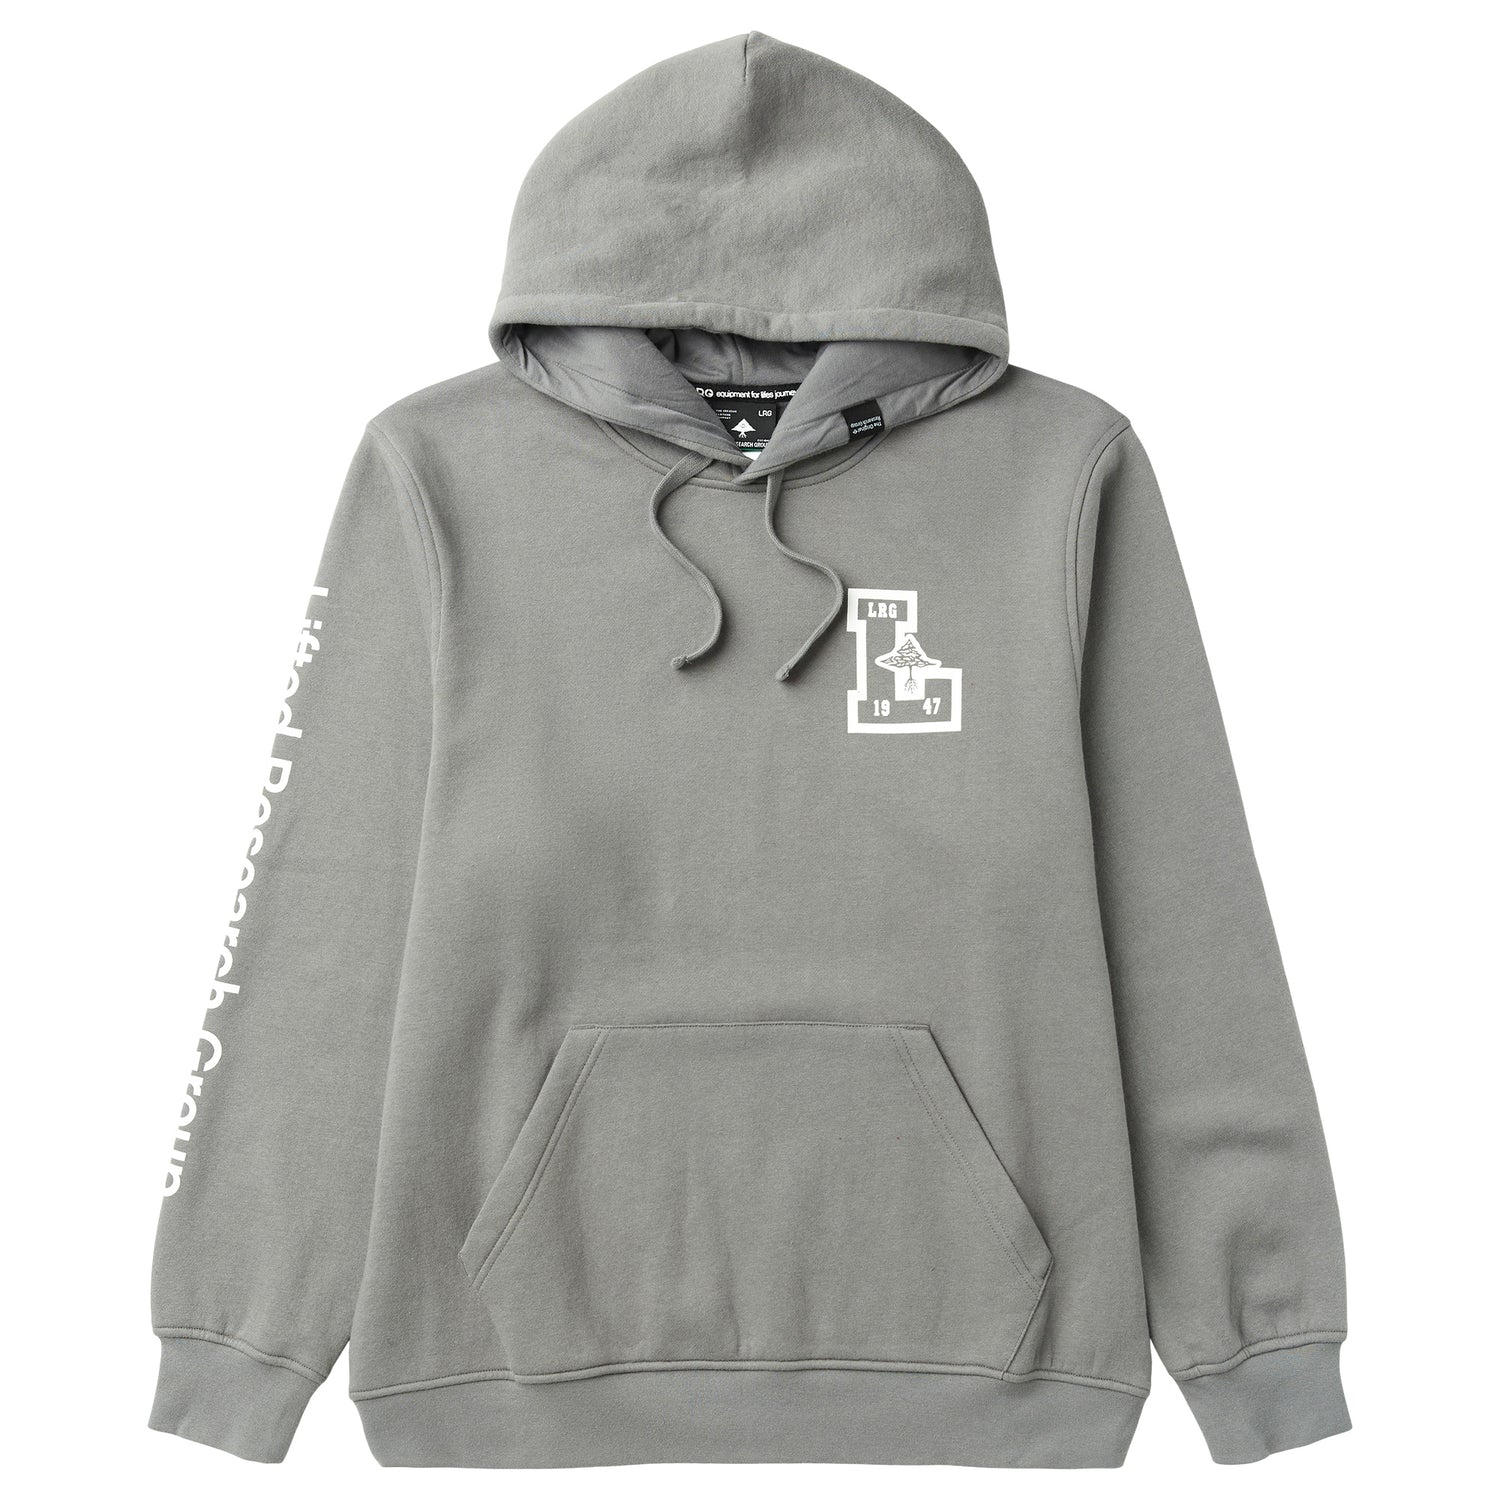 BRIGHTER THAN L PULLOVER HOODIE - CHARCOAL